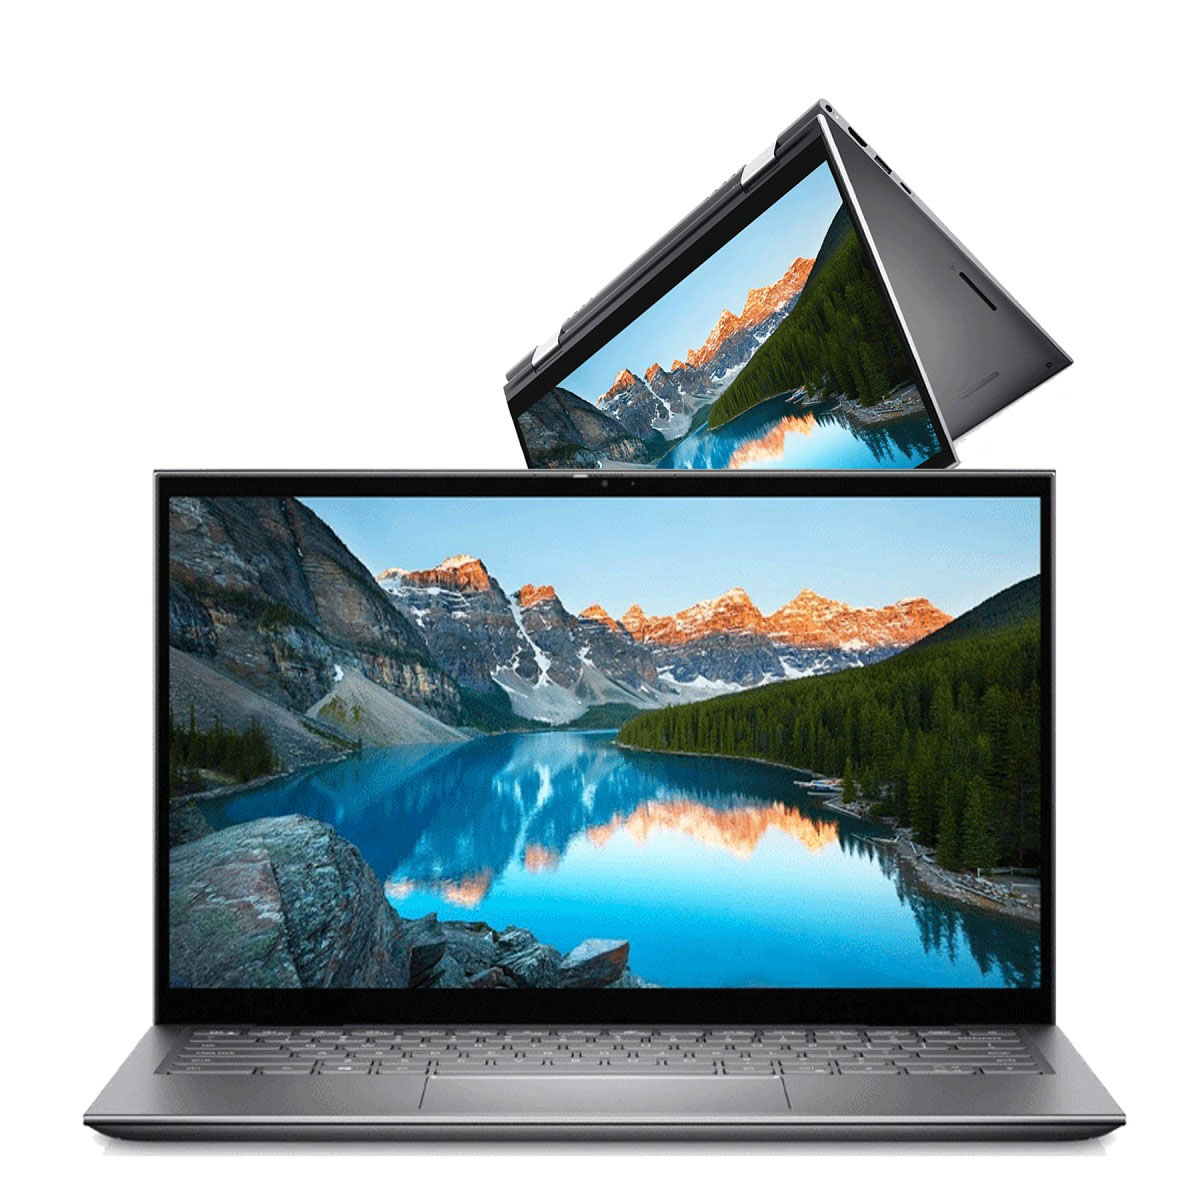 [New 100%] Dell Inspiron 14 5410 2in1 (Core i5-1135G7, 8GB, 256GB, Iris Xe Graphics, 14" FHD Touch)